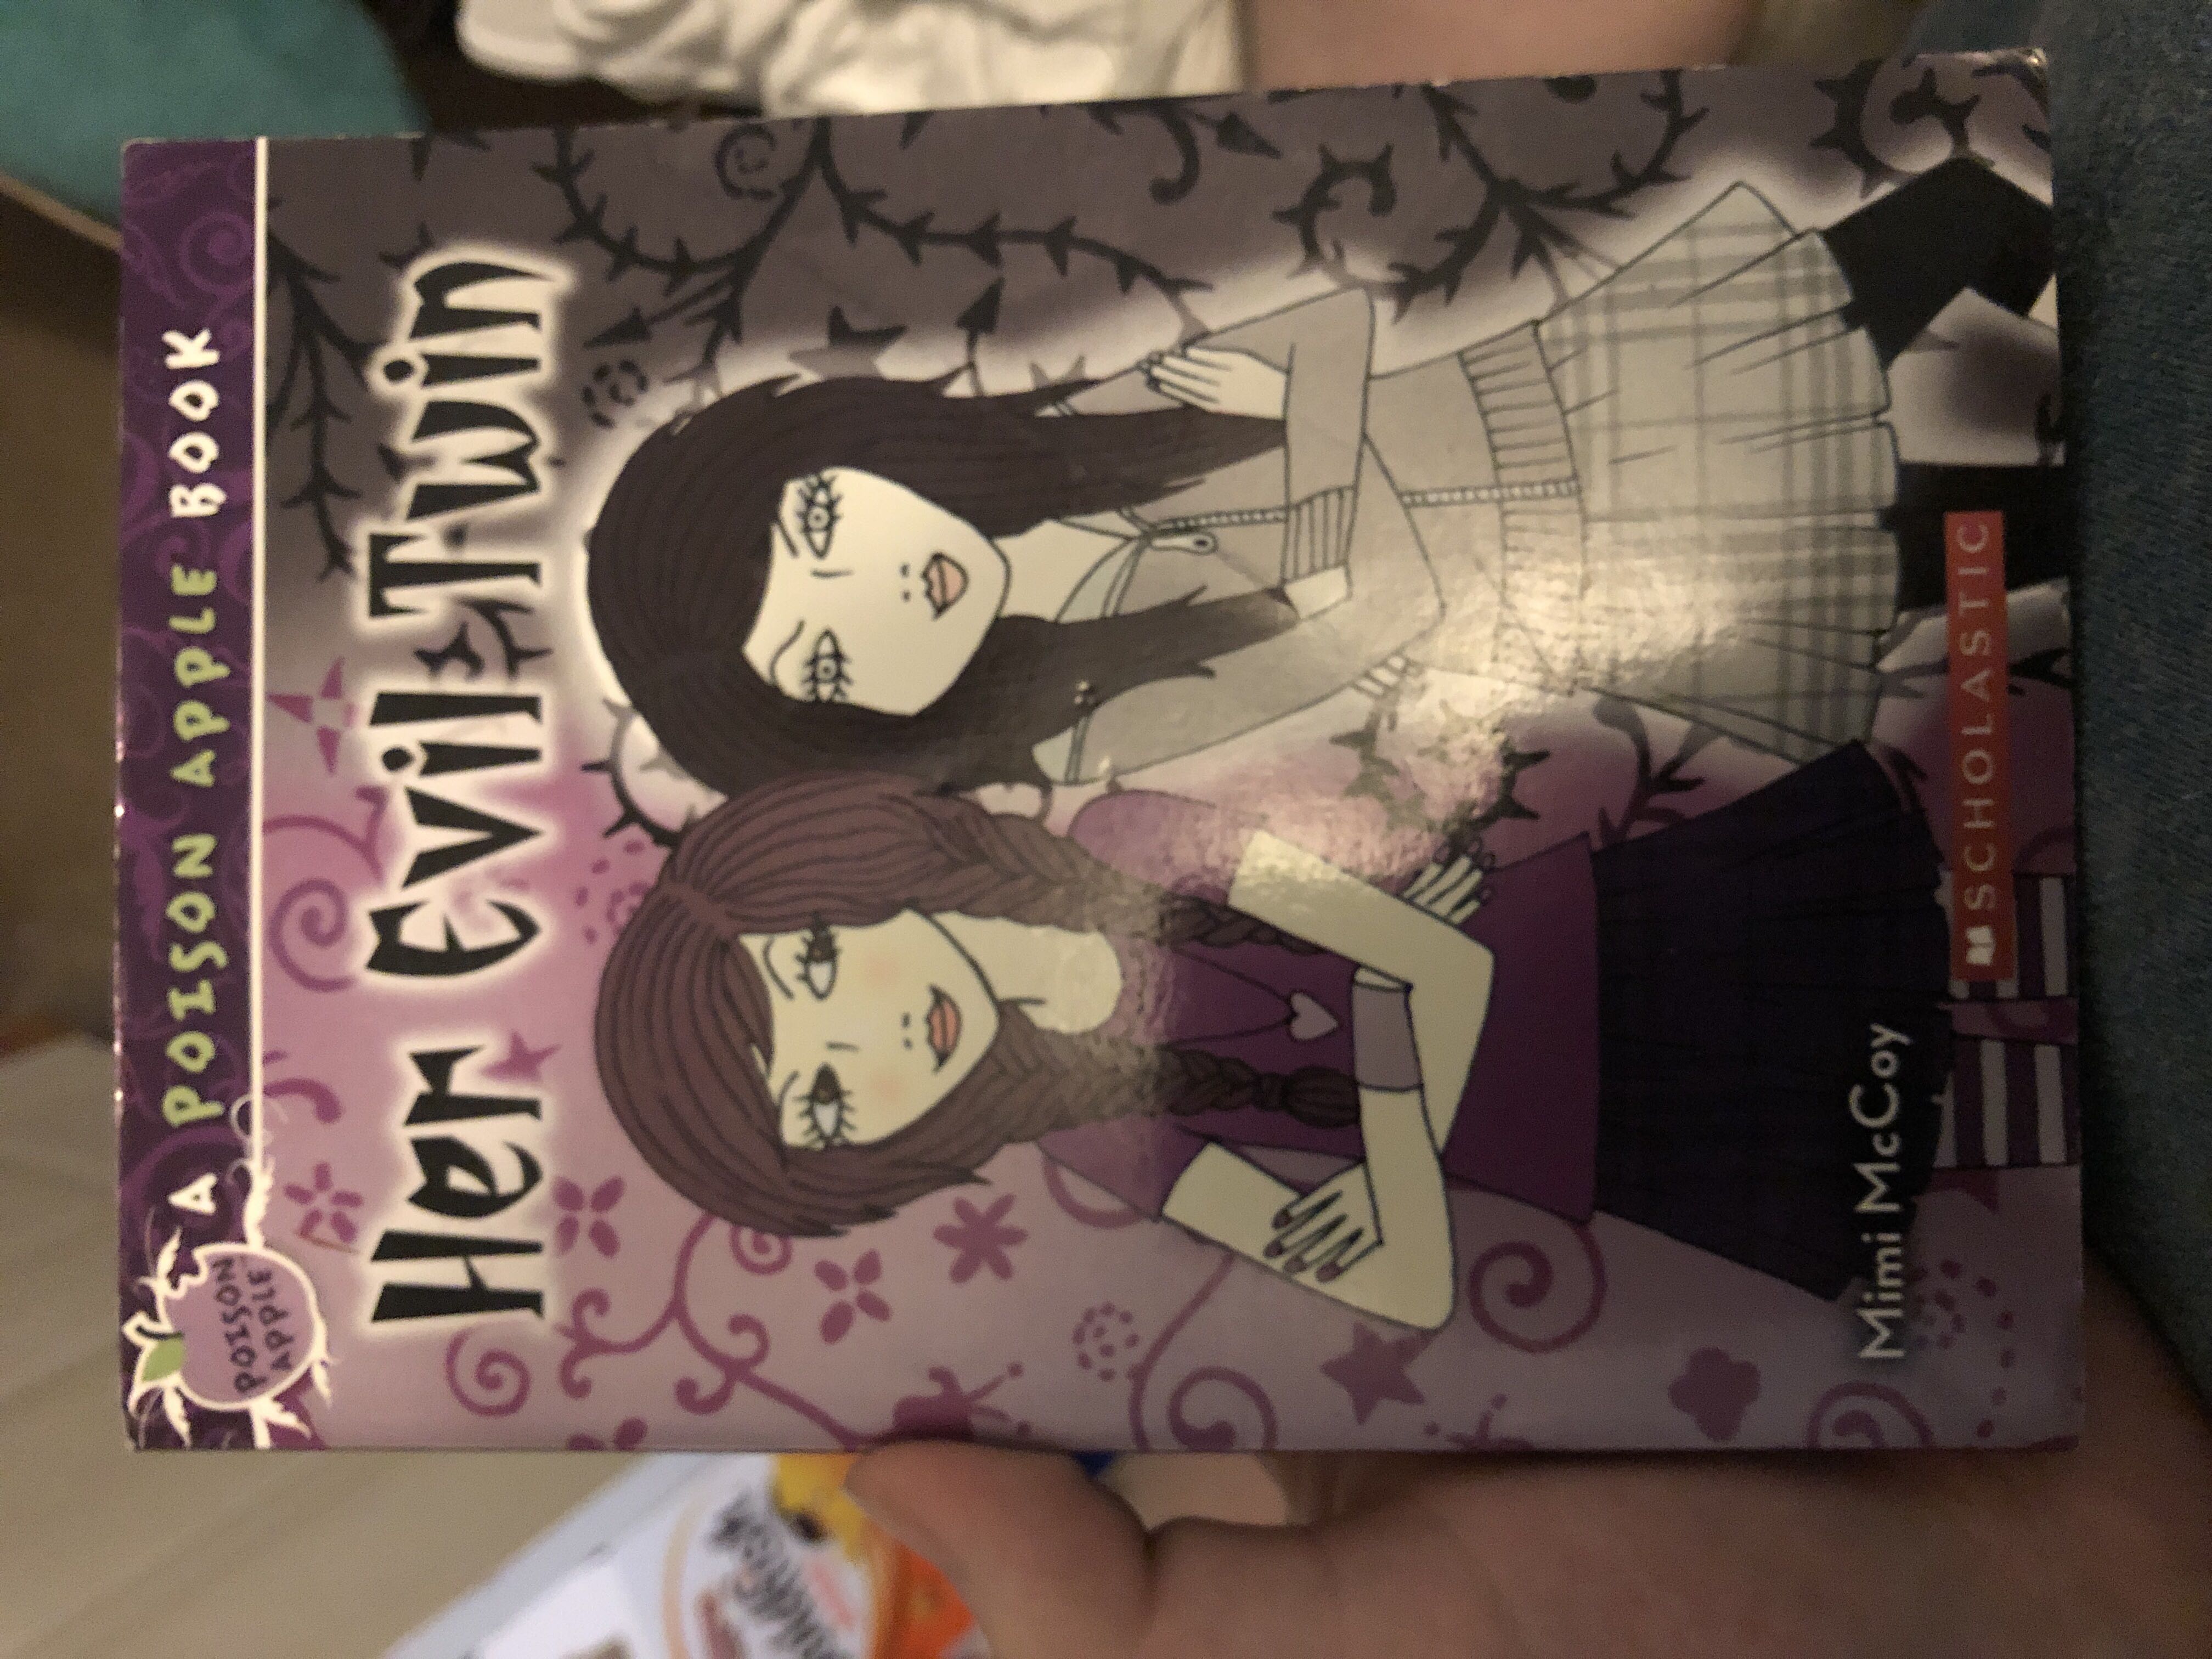 A Poison Apple Book: Her Evil Twin - Mimi Mcoy (Scholastic Paperbacks) book collectible [Barcode 9780545230933] - Main Image 1